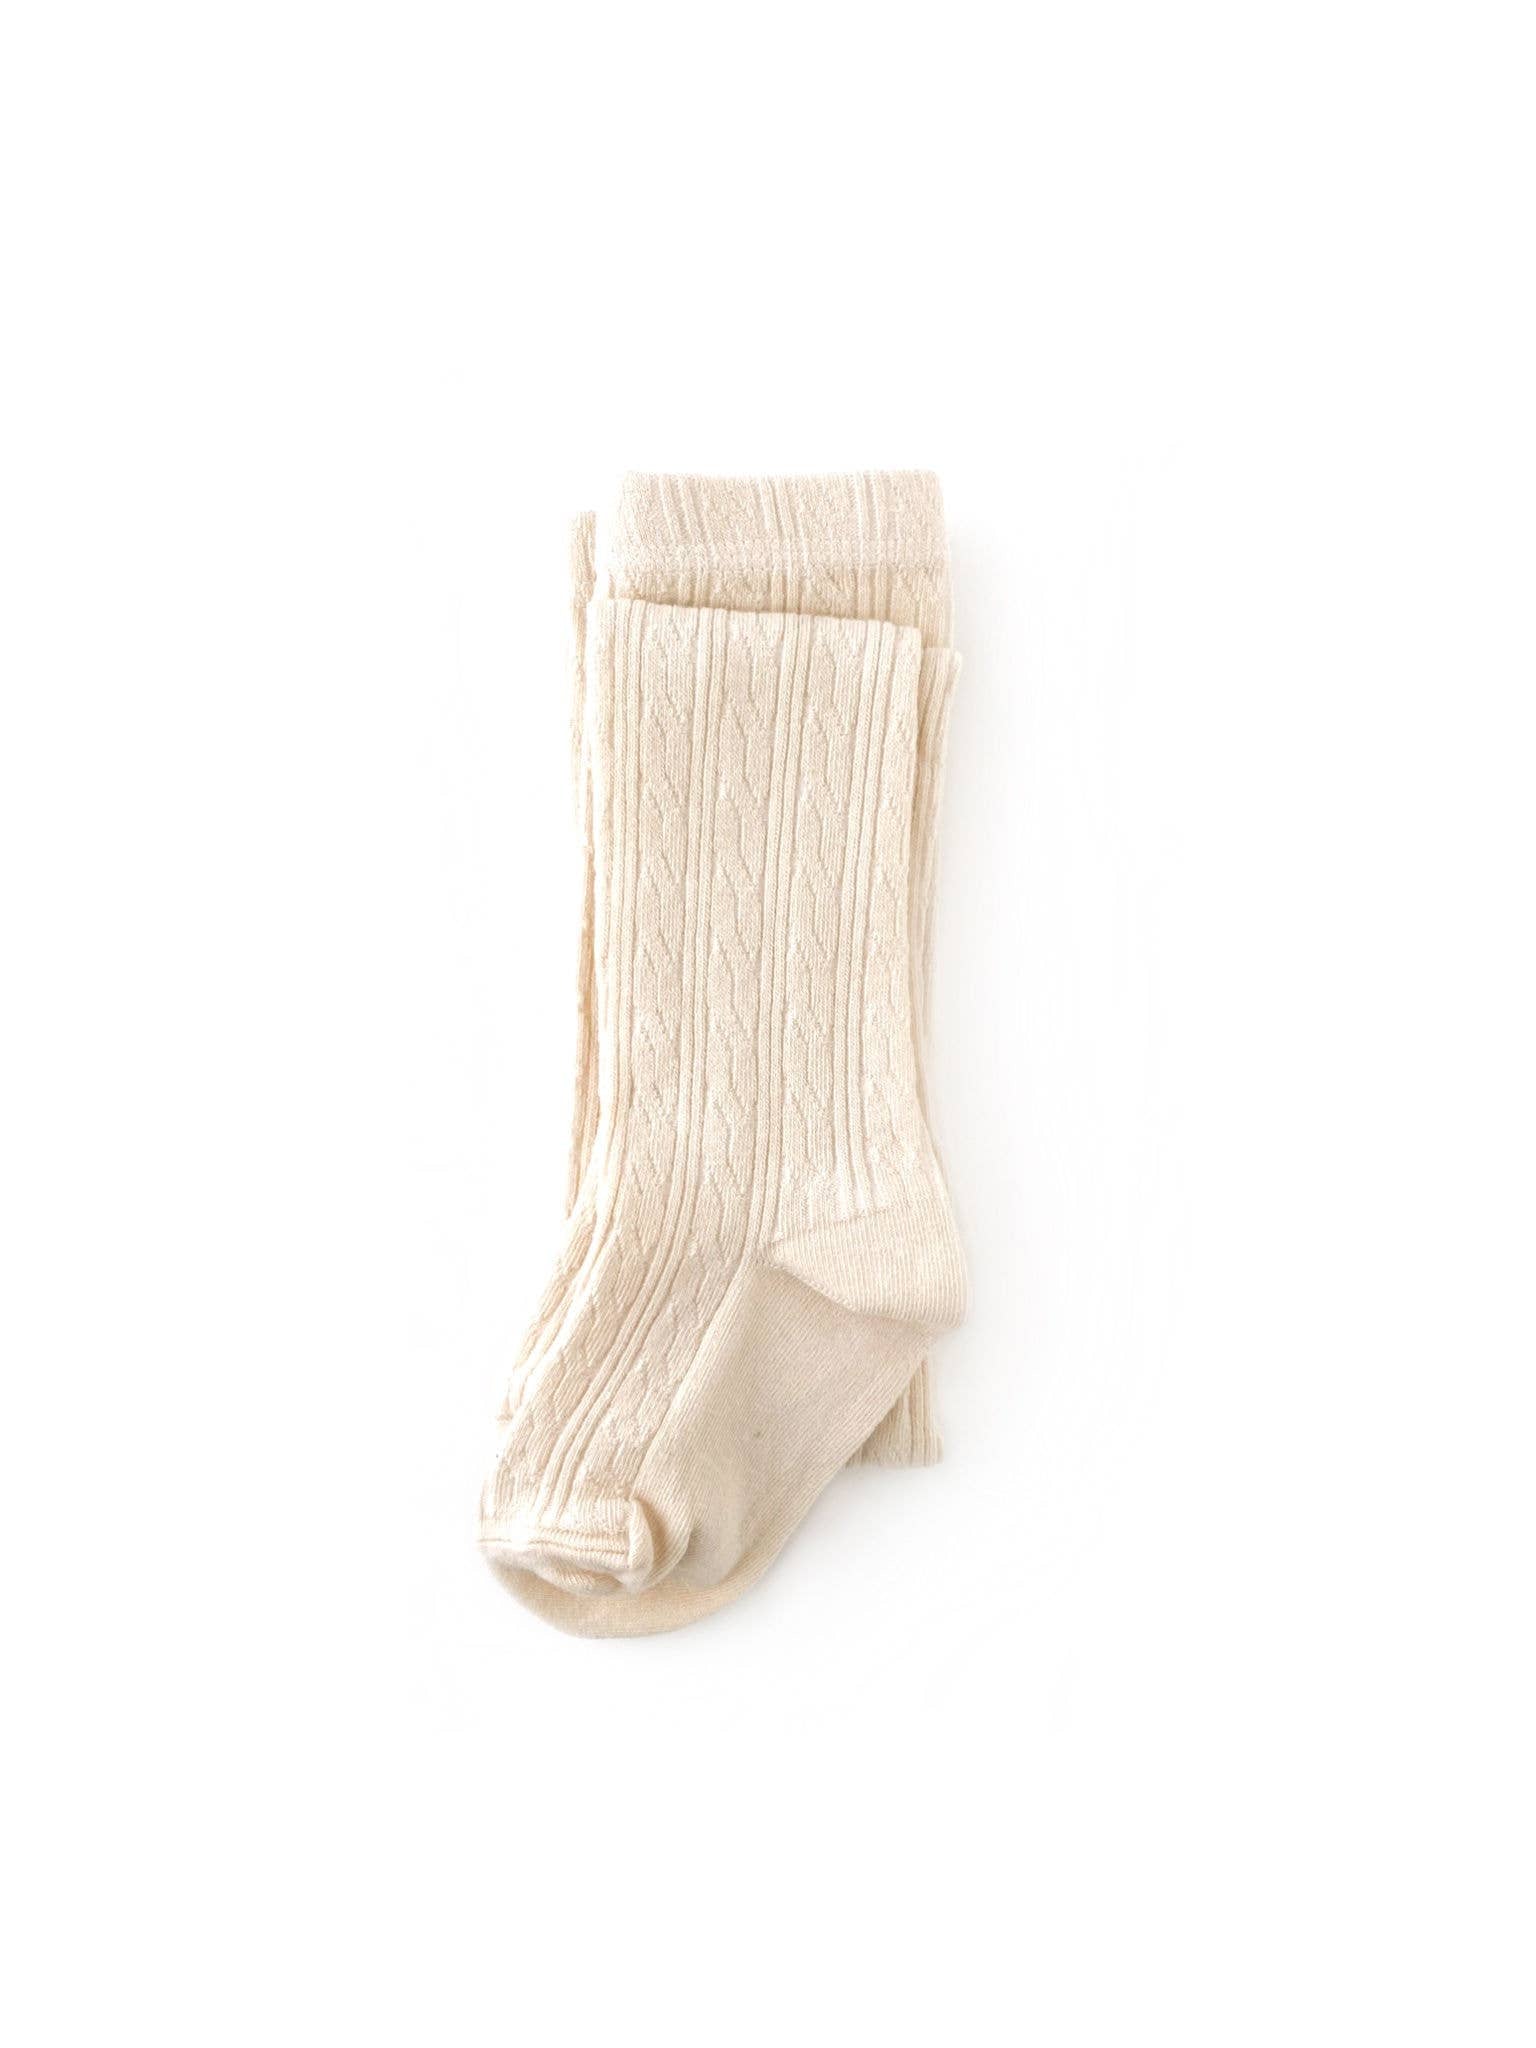 Vanilla Cable Knit Tights - Little Stocking Company